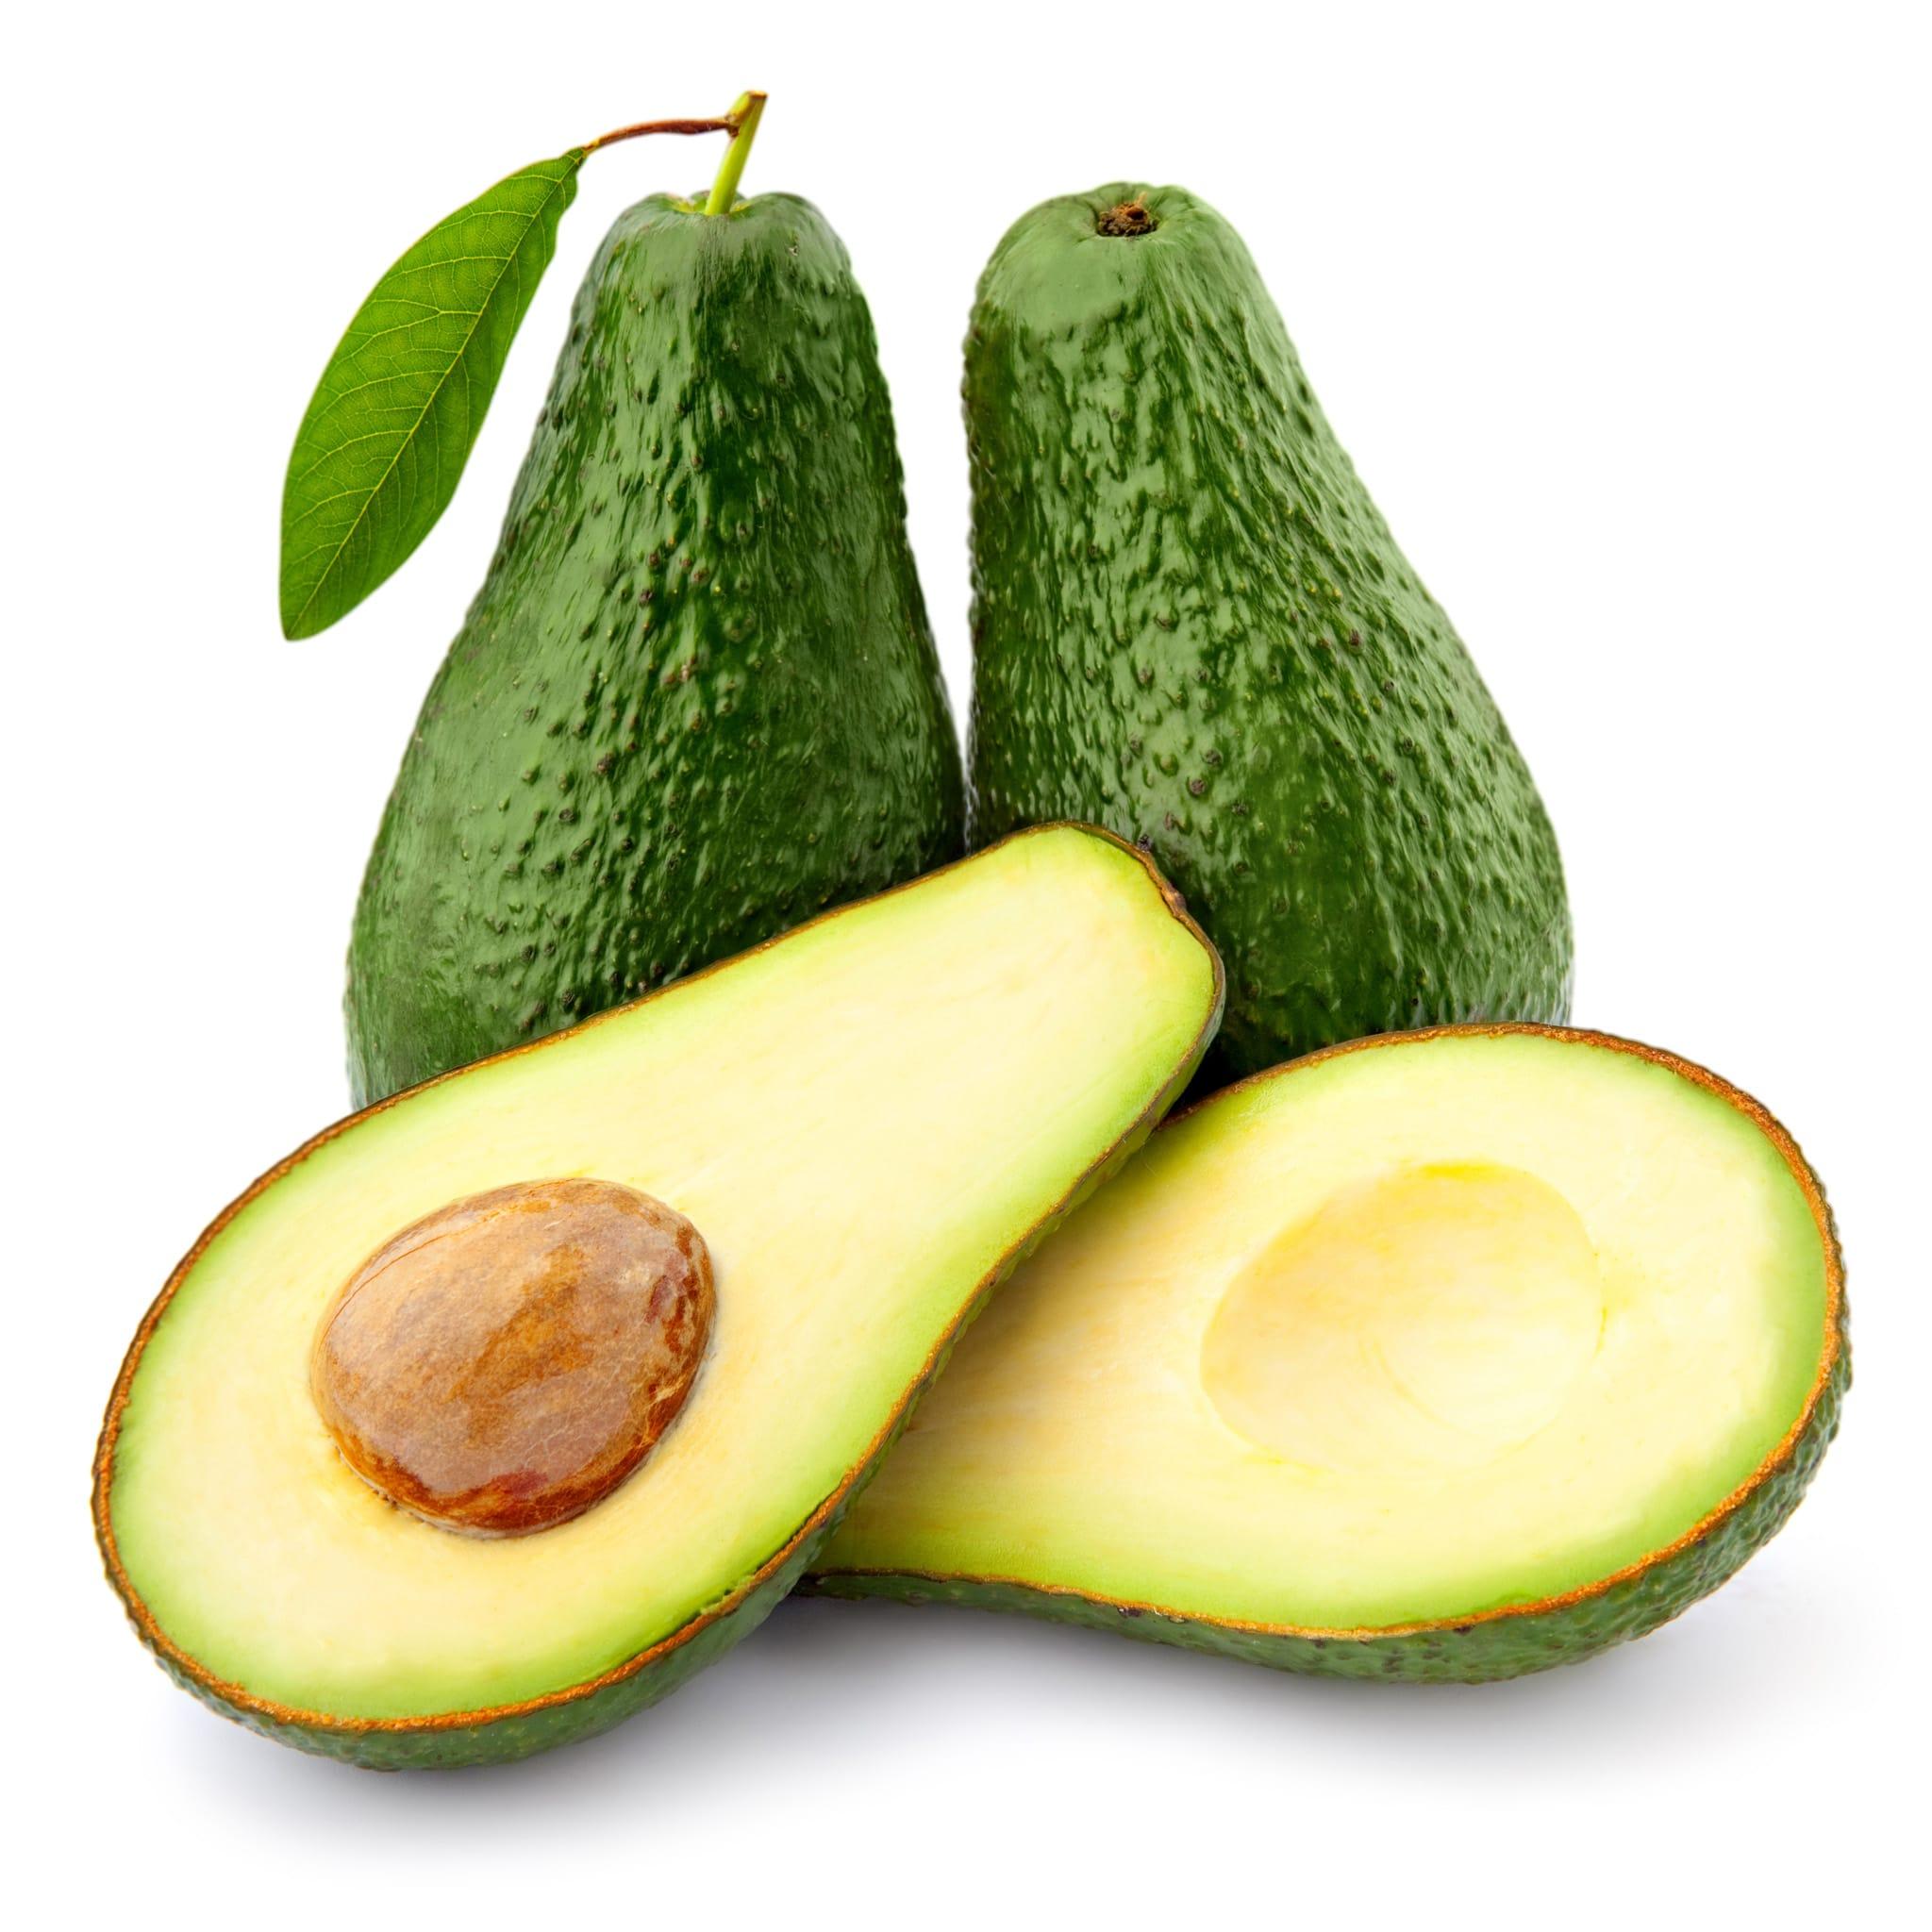 Best 57+ Avocados Wallpapers on HipWallpapers